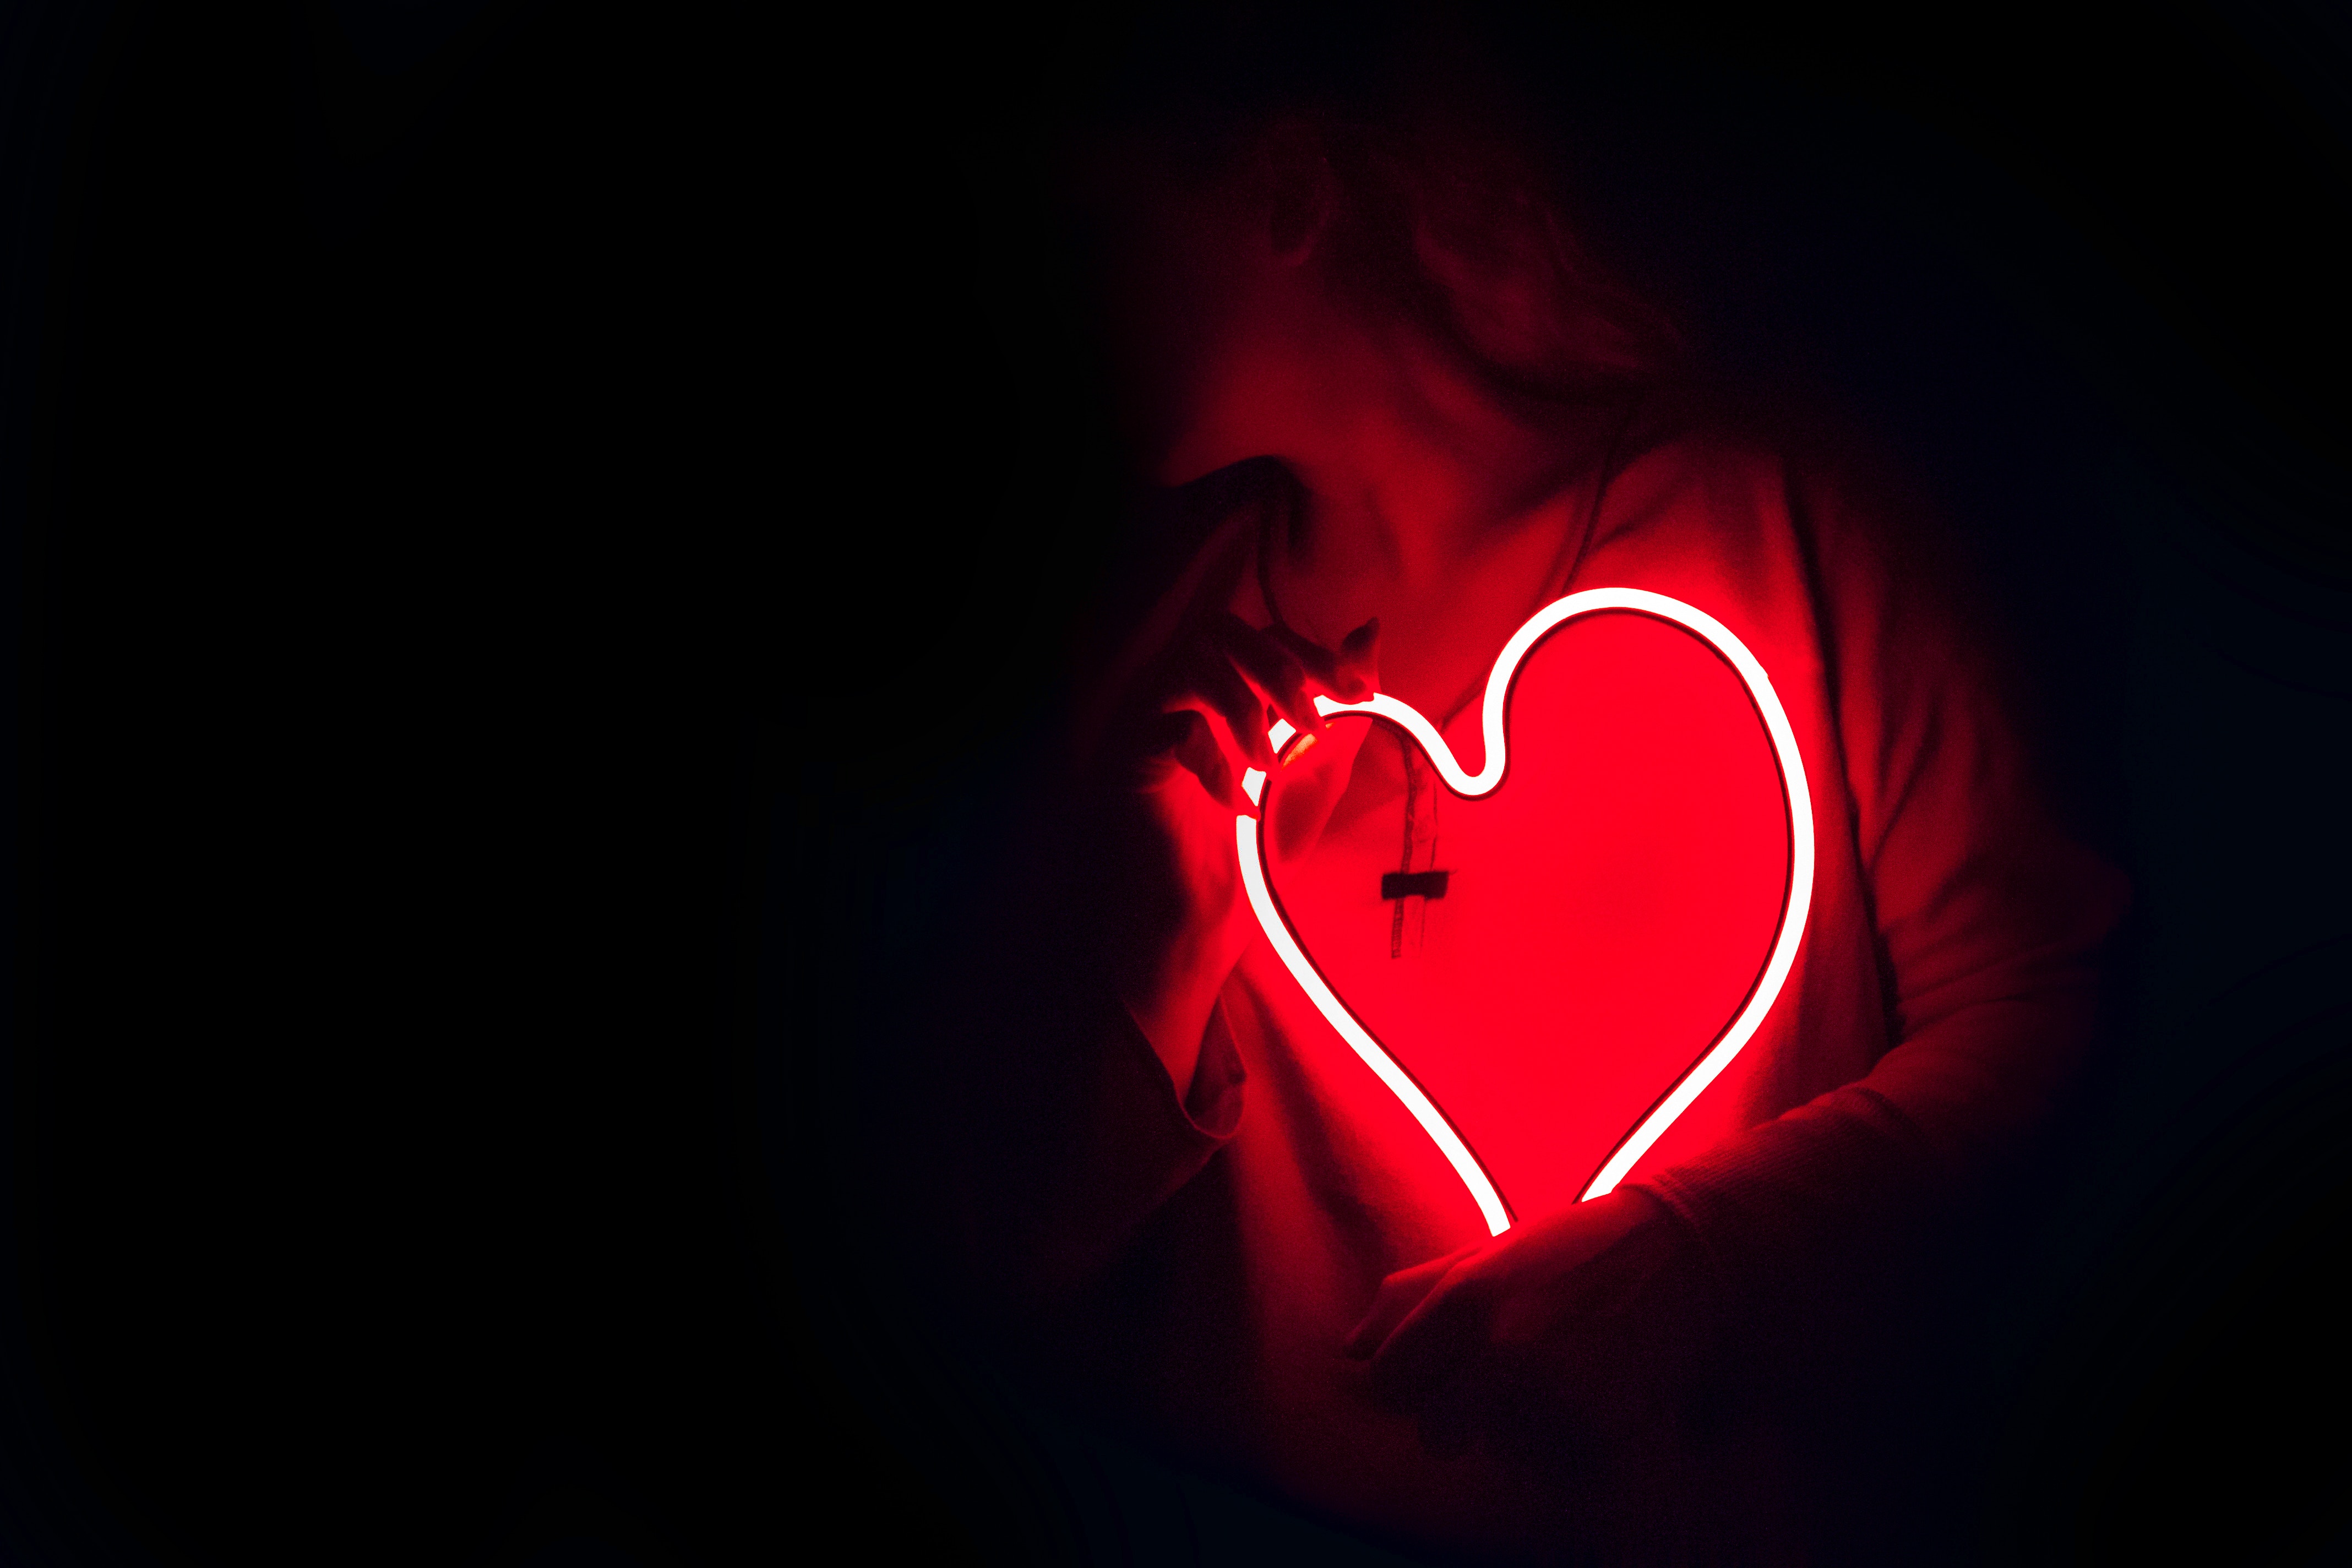 86889 download wallpaper neon, love, shine, light, hands, heart screensavers and pictures for free